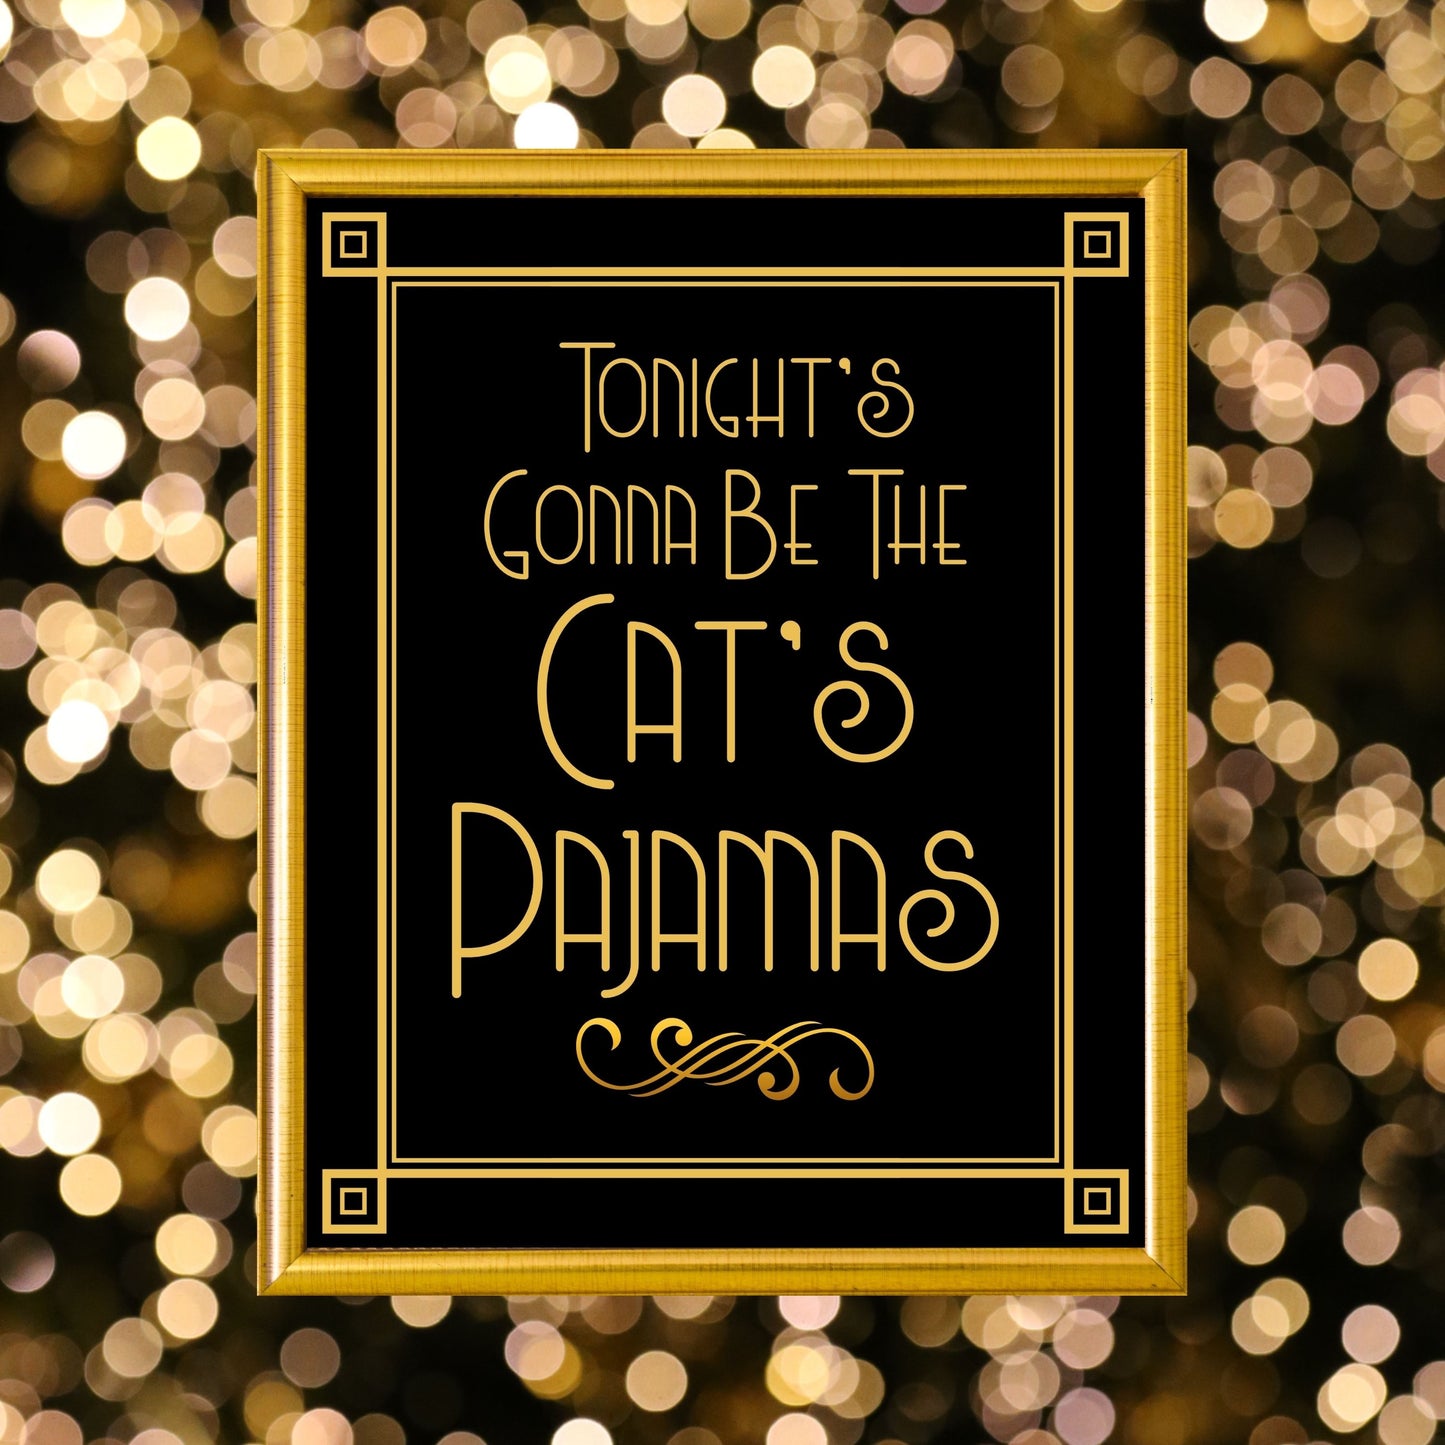 "Tonight's Gonna Be The Cat's Pajamas" Printable Party Sign For Great Gatsby or Roaring 20's Party Or Wedding, Black & Gold, Printable Party Decor